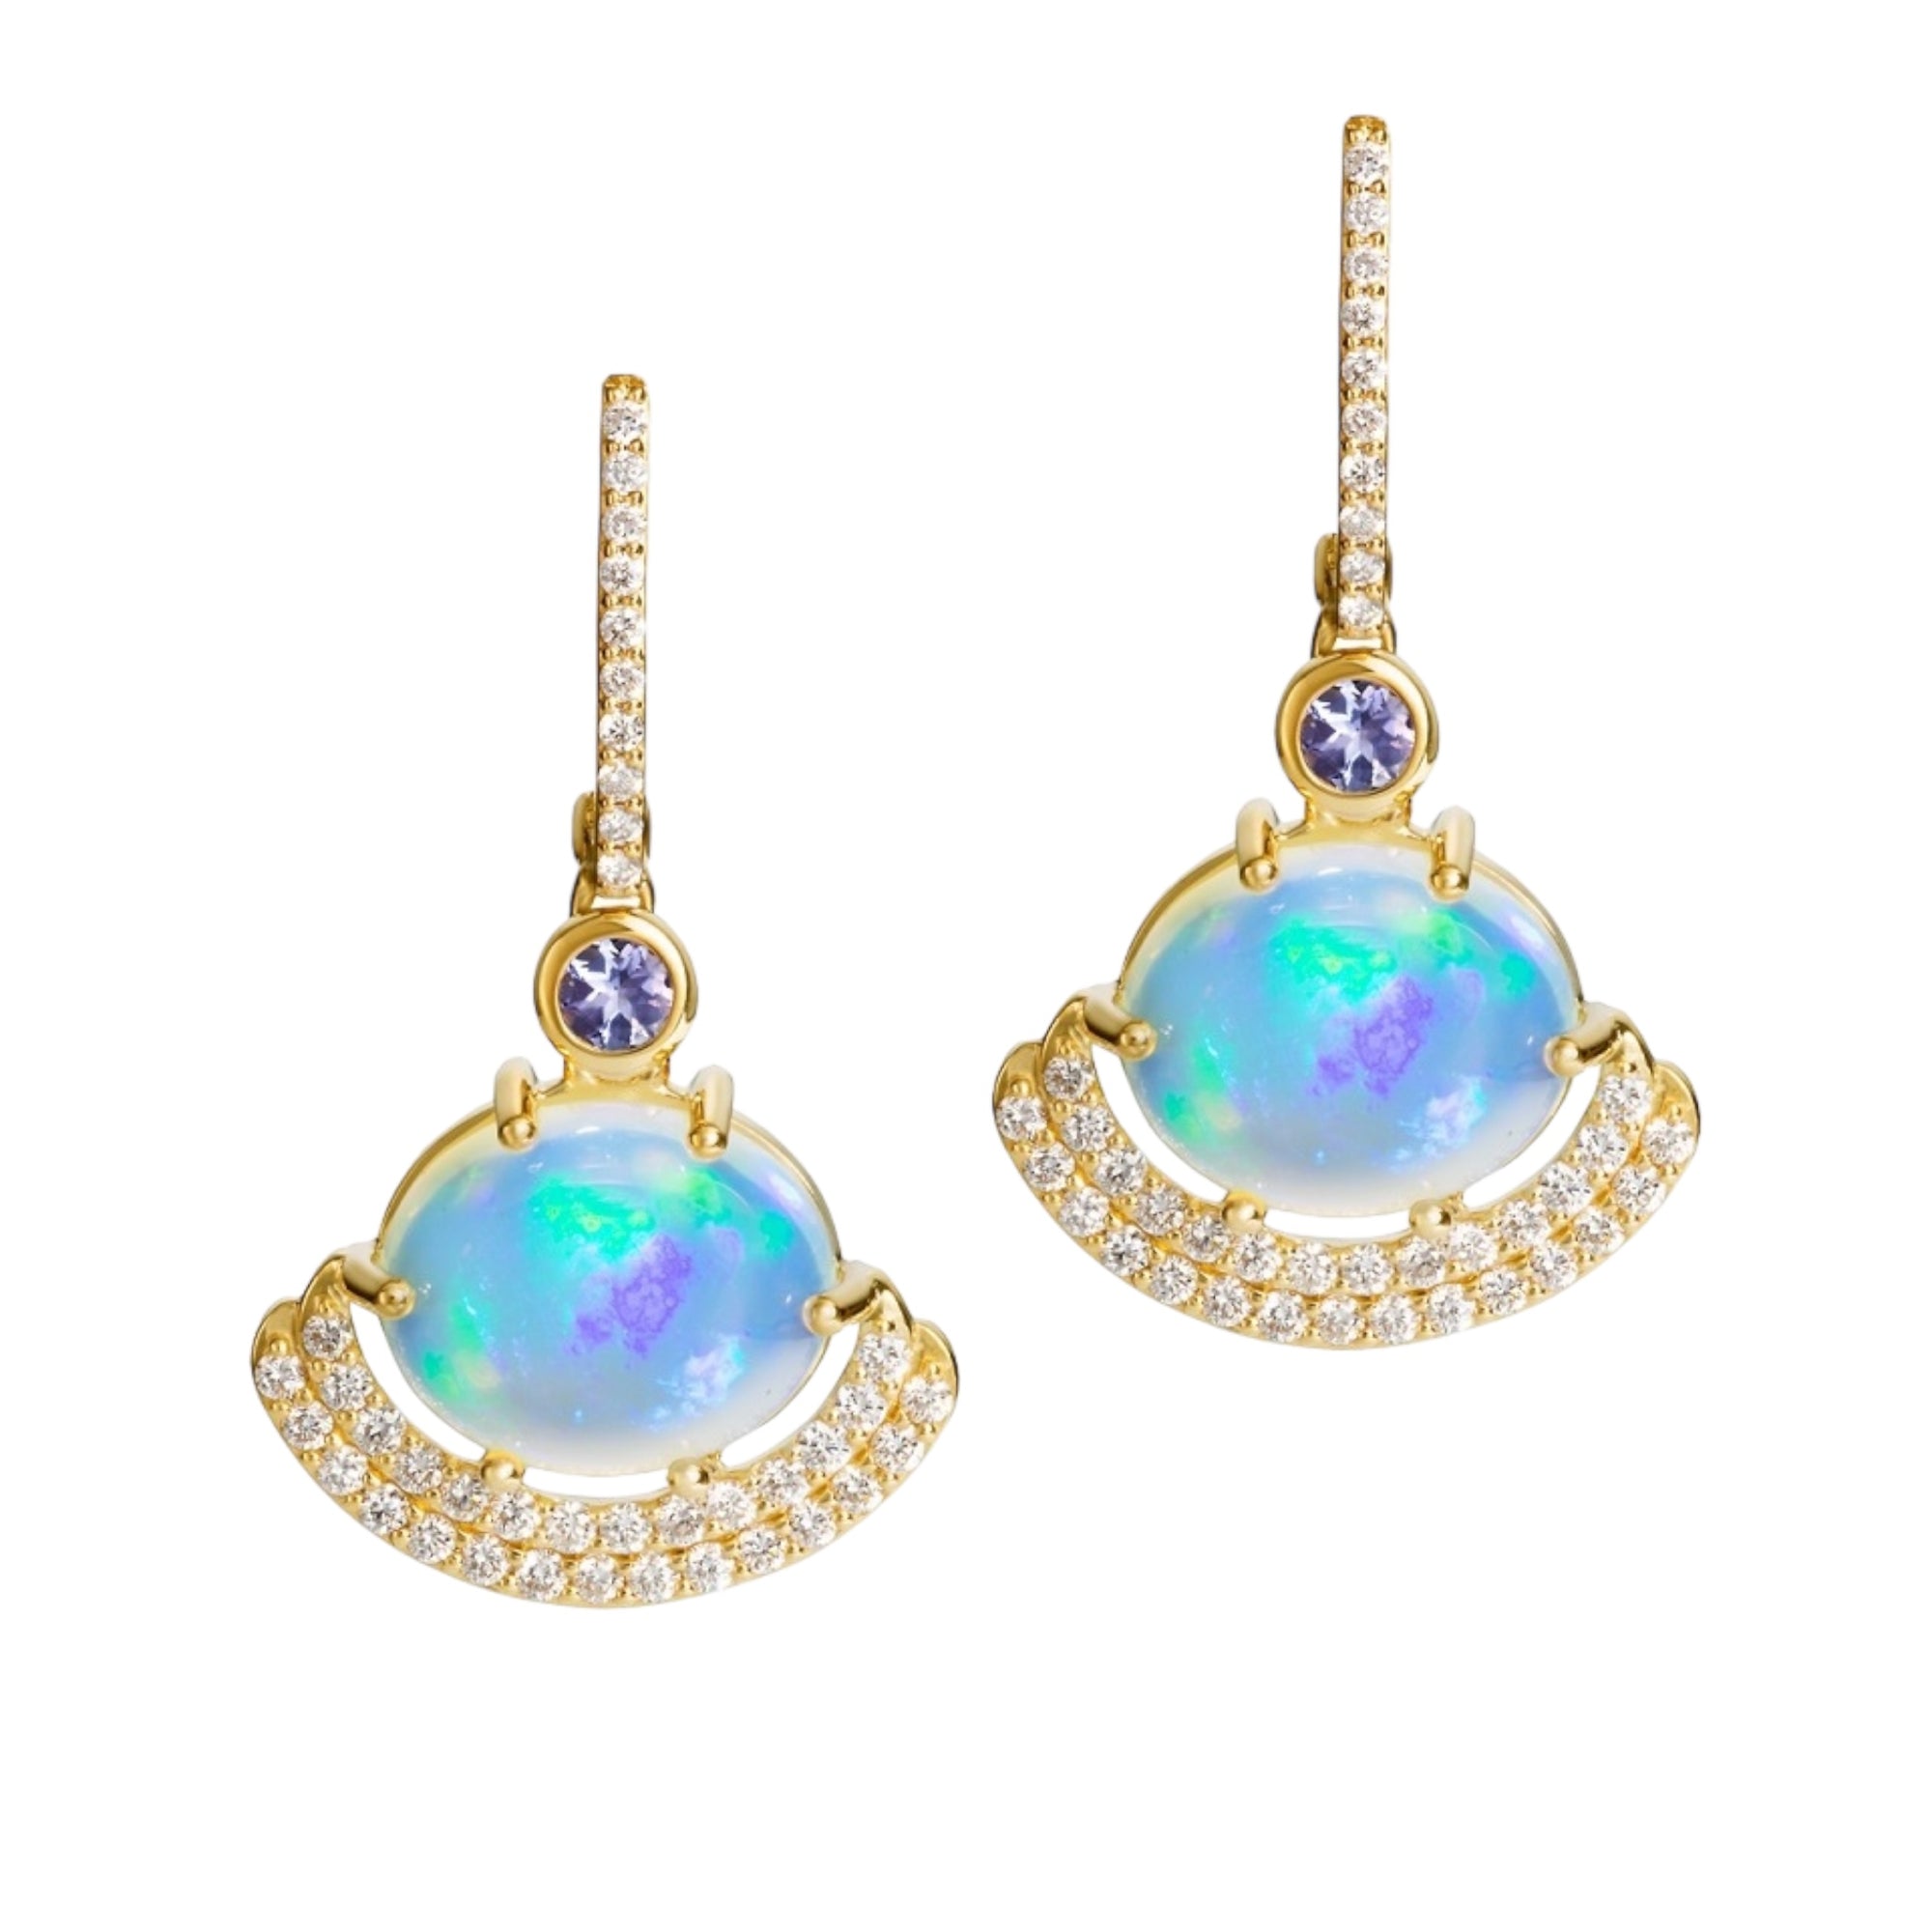 Welo Opal Eclipse Earrings by Martha Seely available at Talisman Collection Fine Jewelers in El Dorado Hills, CA and online. Stats: Crafted with 12x10 mm Welo Opals set in 14k yellow gold, these earrings will make you shine like a star at any event. The opals flash with stunning colors, while 1.26 cts of diamonds and tanzanite add a touch of luxury. An elegant addition to your jewelry wardrobe.